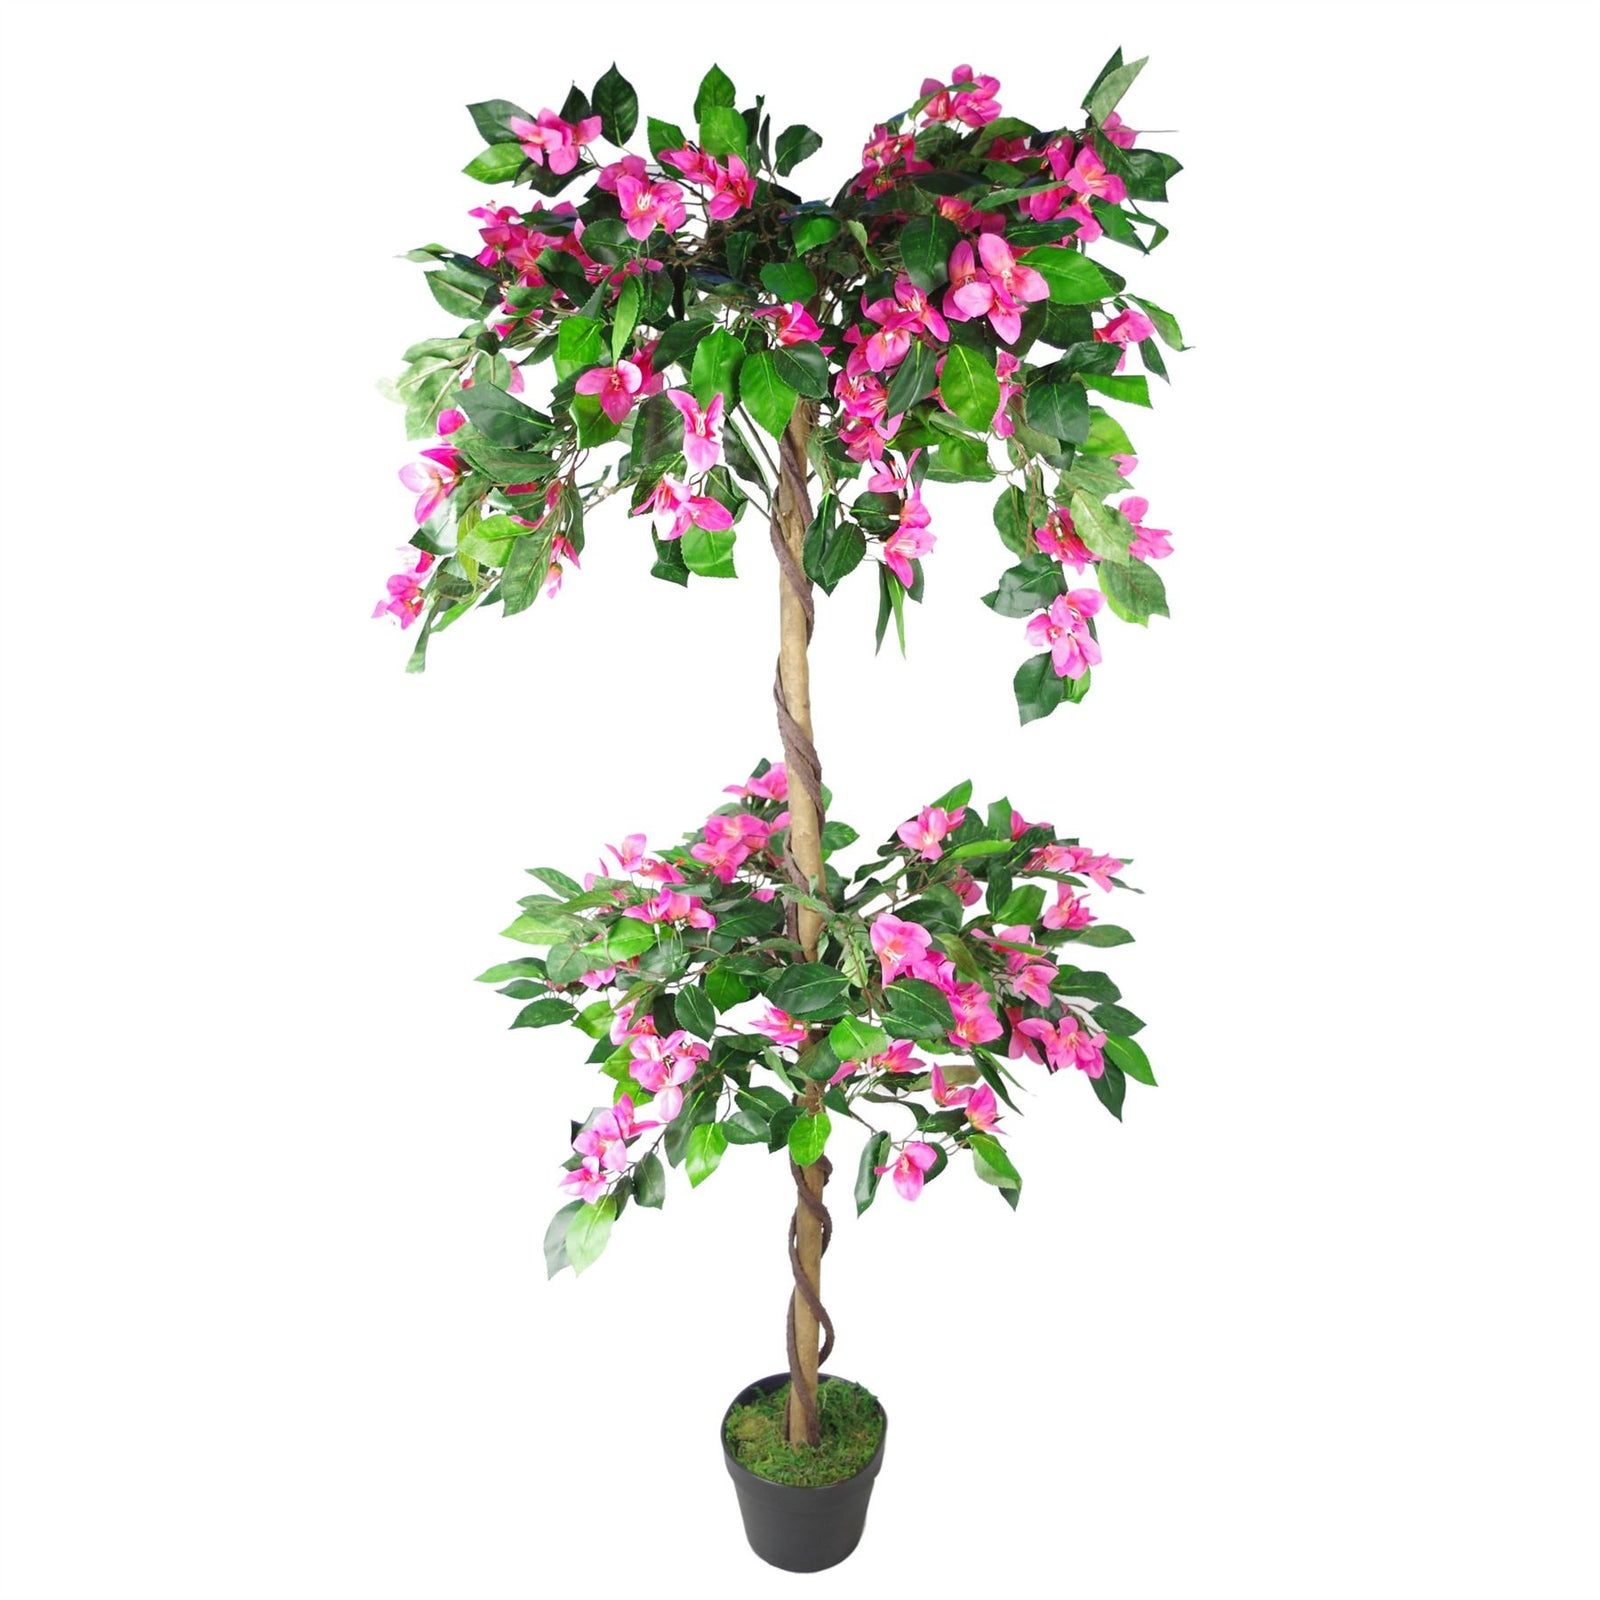 Leaf 140cm Extra Large Artificial Flowering Rhododendron Bush Tree